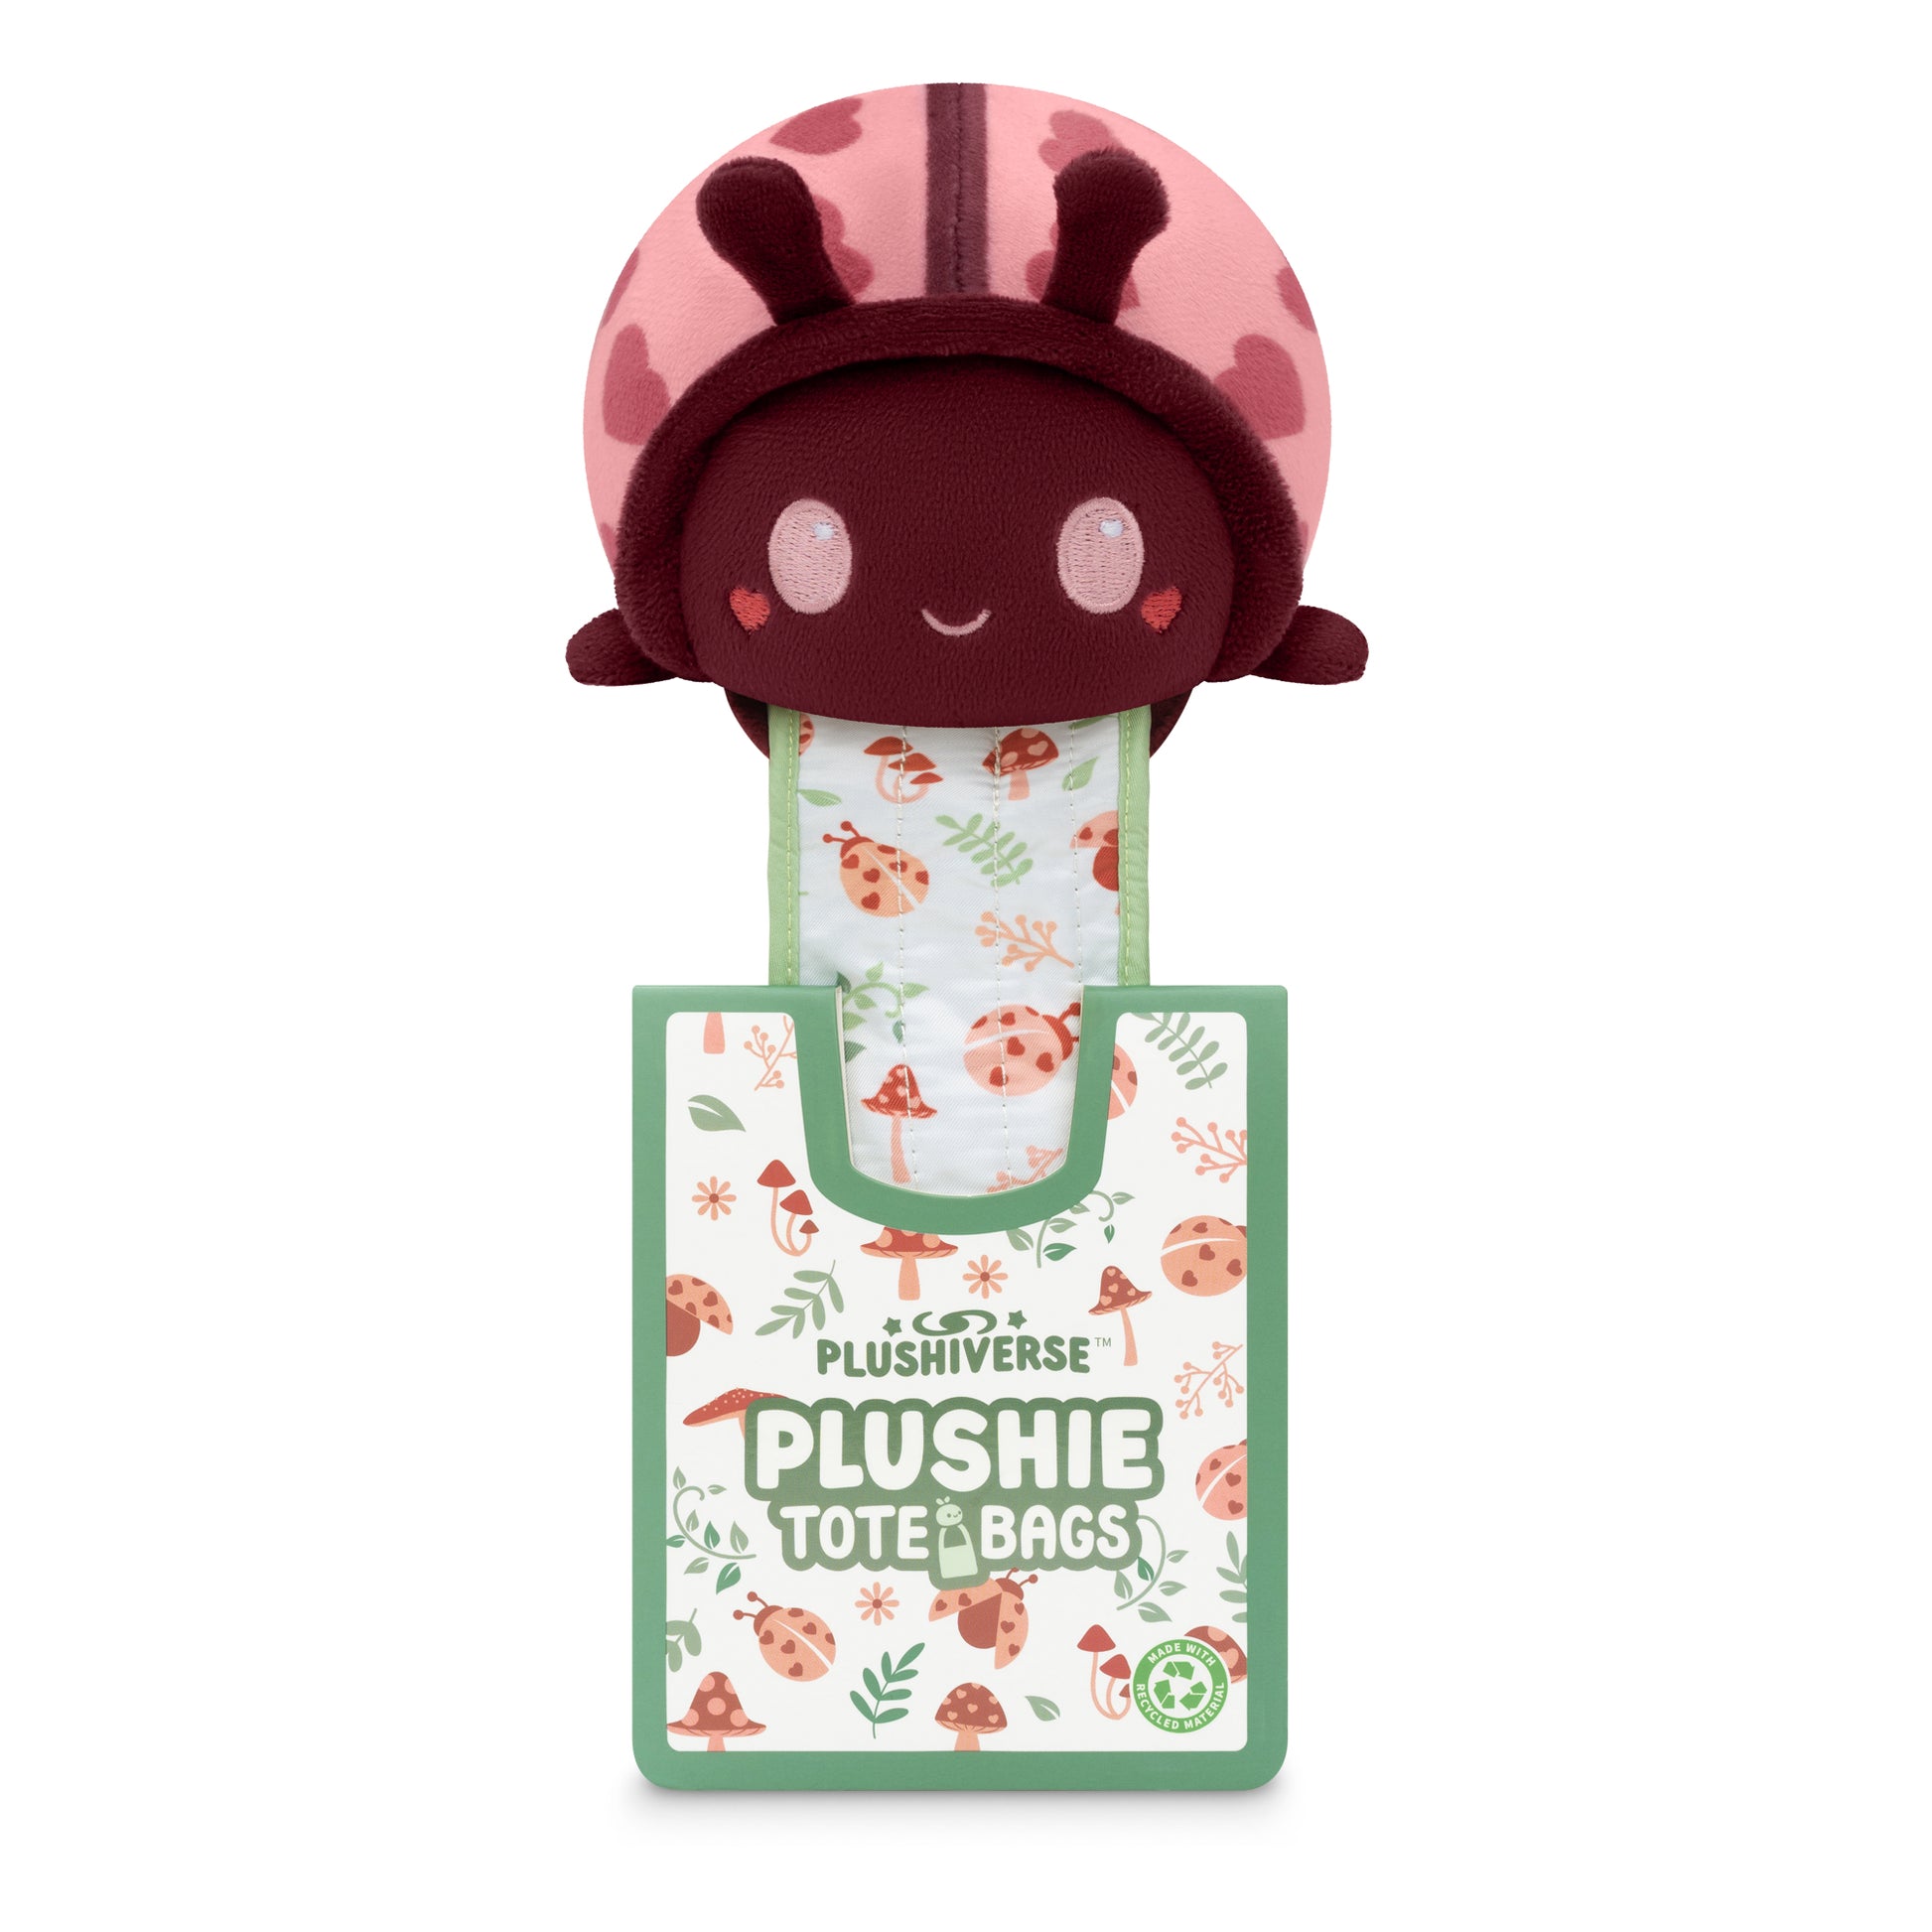 A Plushiverse Lovebug plushie with a pink flower on top, perfect for velcro storage pouched or TeeTurtle tote bags.